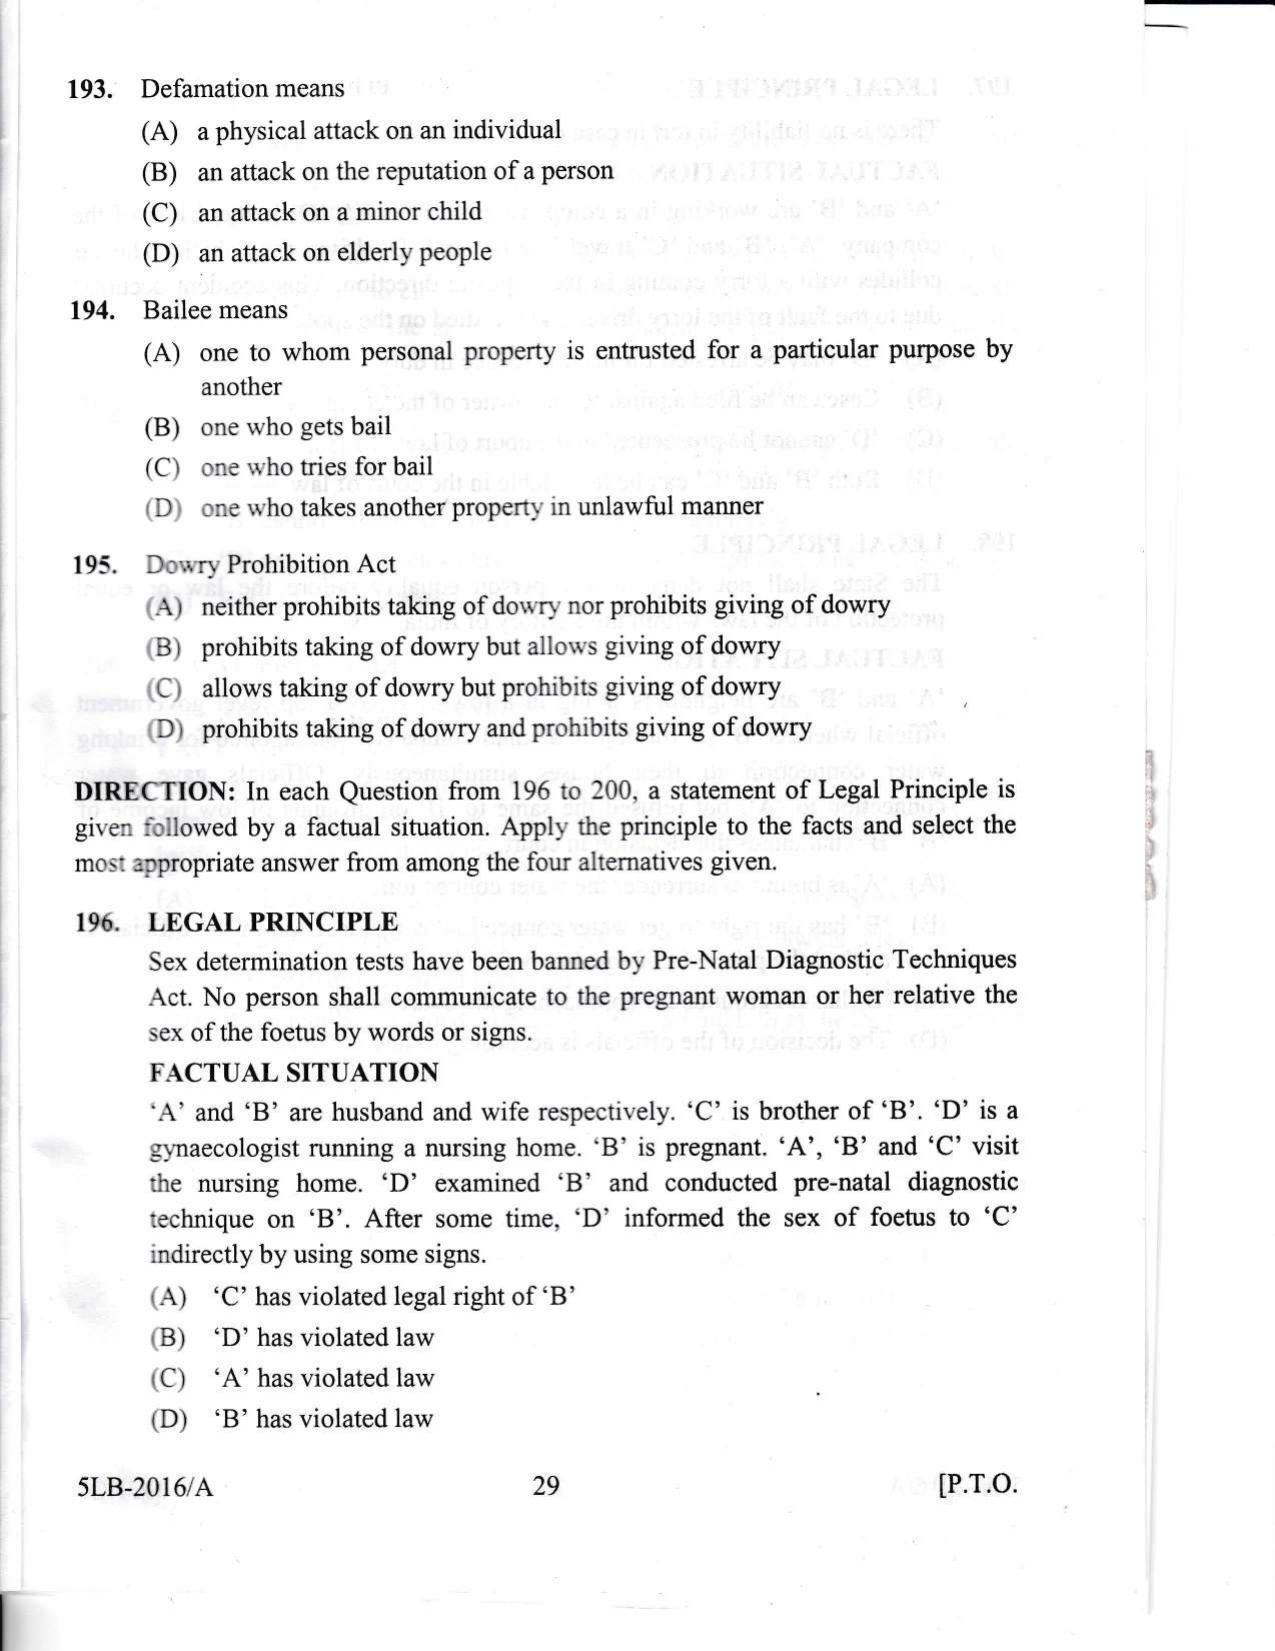 KLEE 5 Year LLB Exam 2016 Question Paper - Page 29